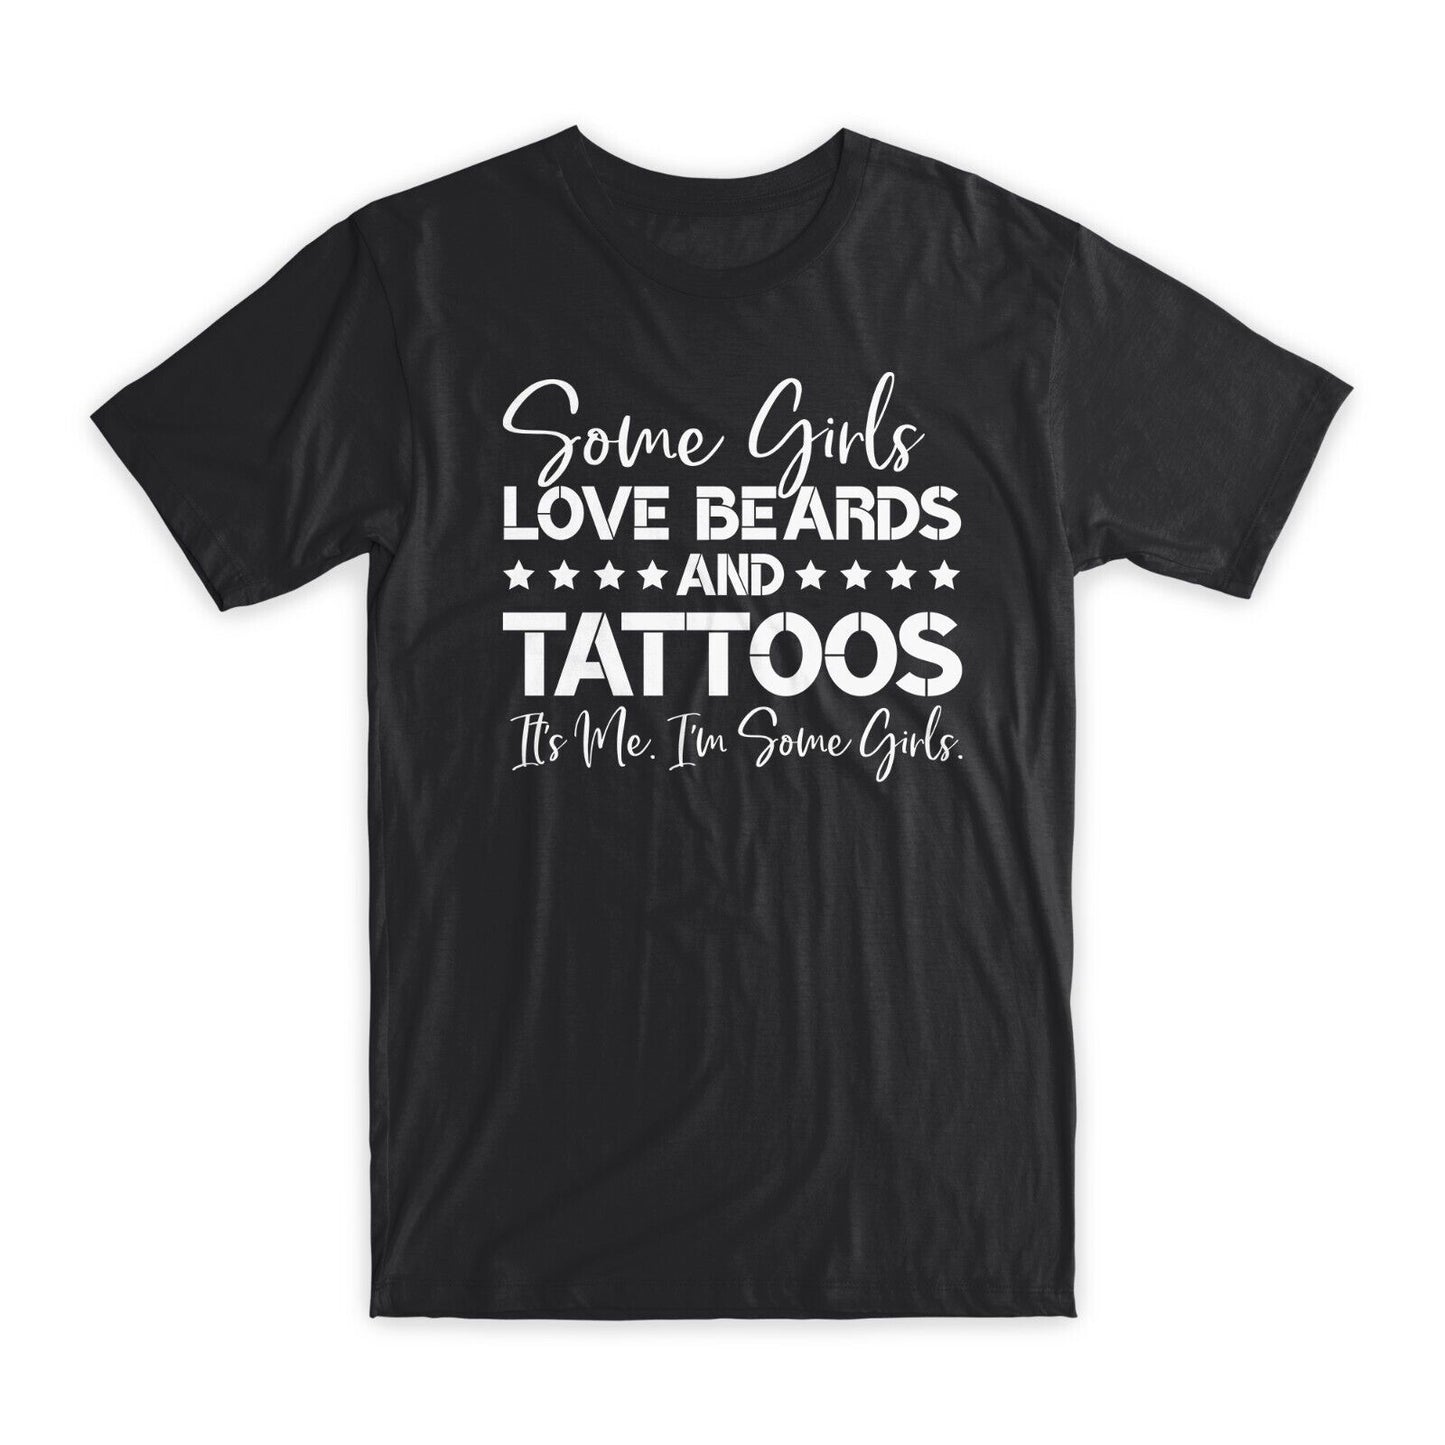 Some Girls Love Beards and Tattoos T-Shirt Premium Soft Cotton Funny T Gift NEW